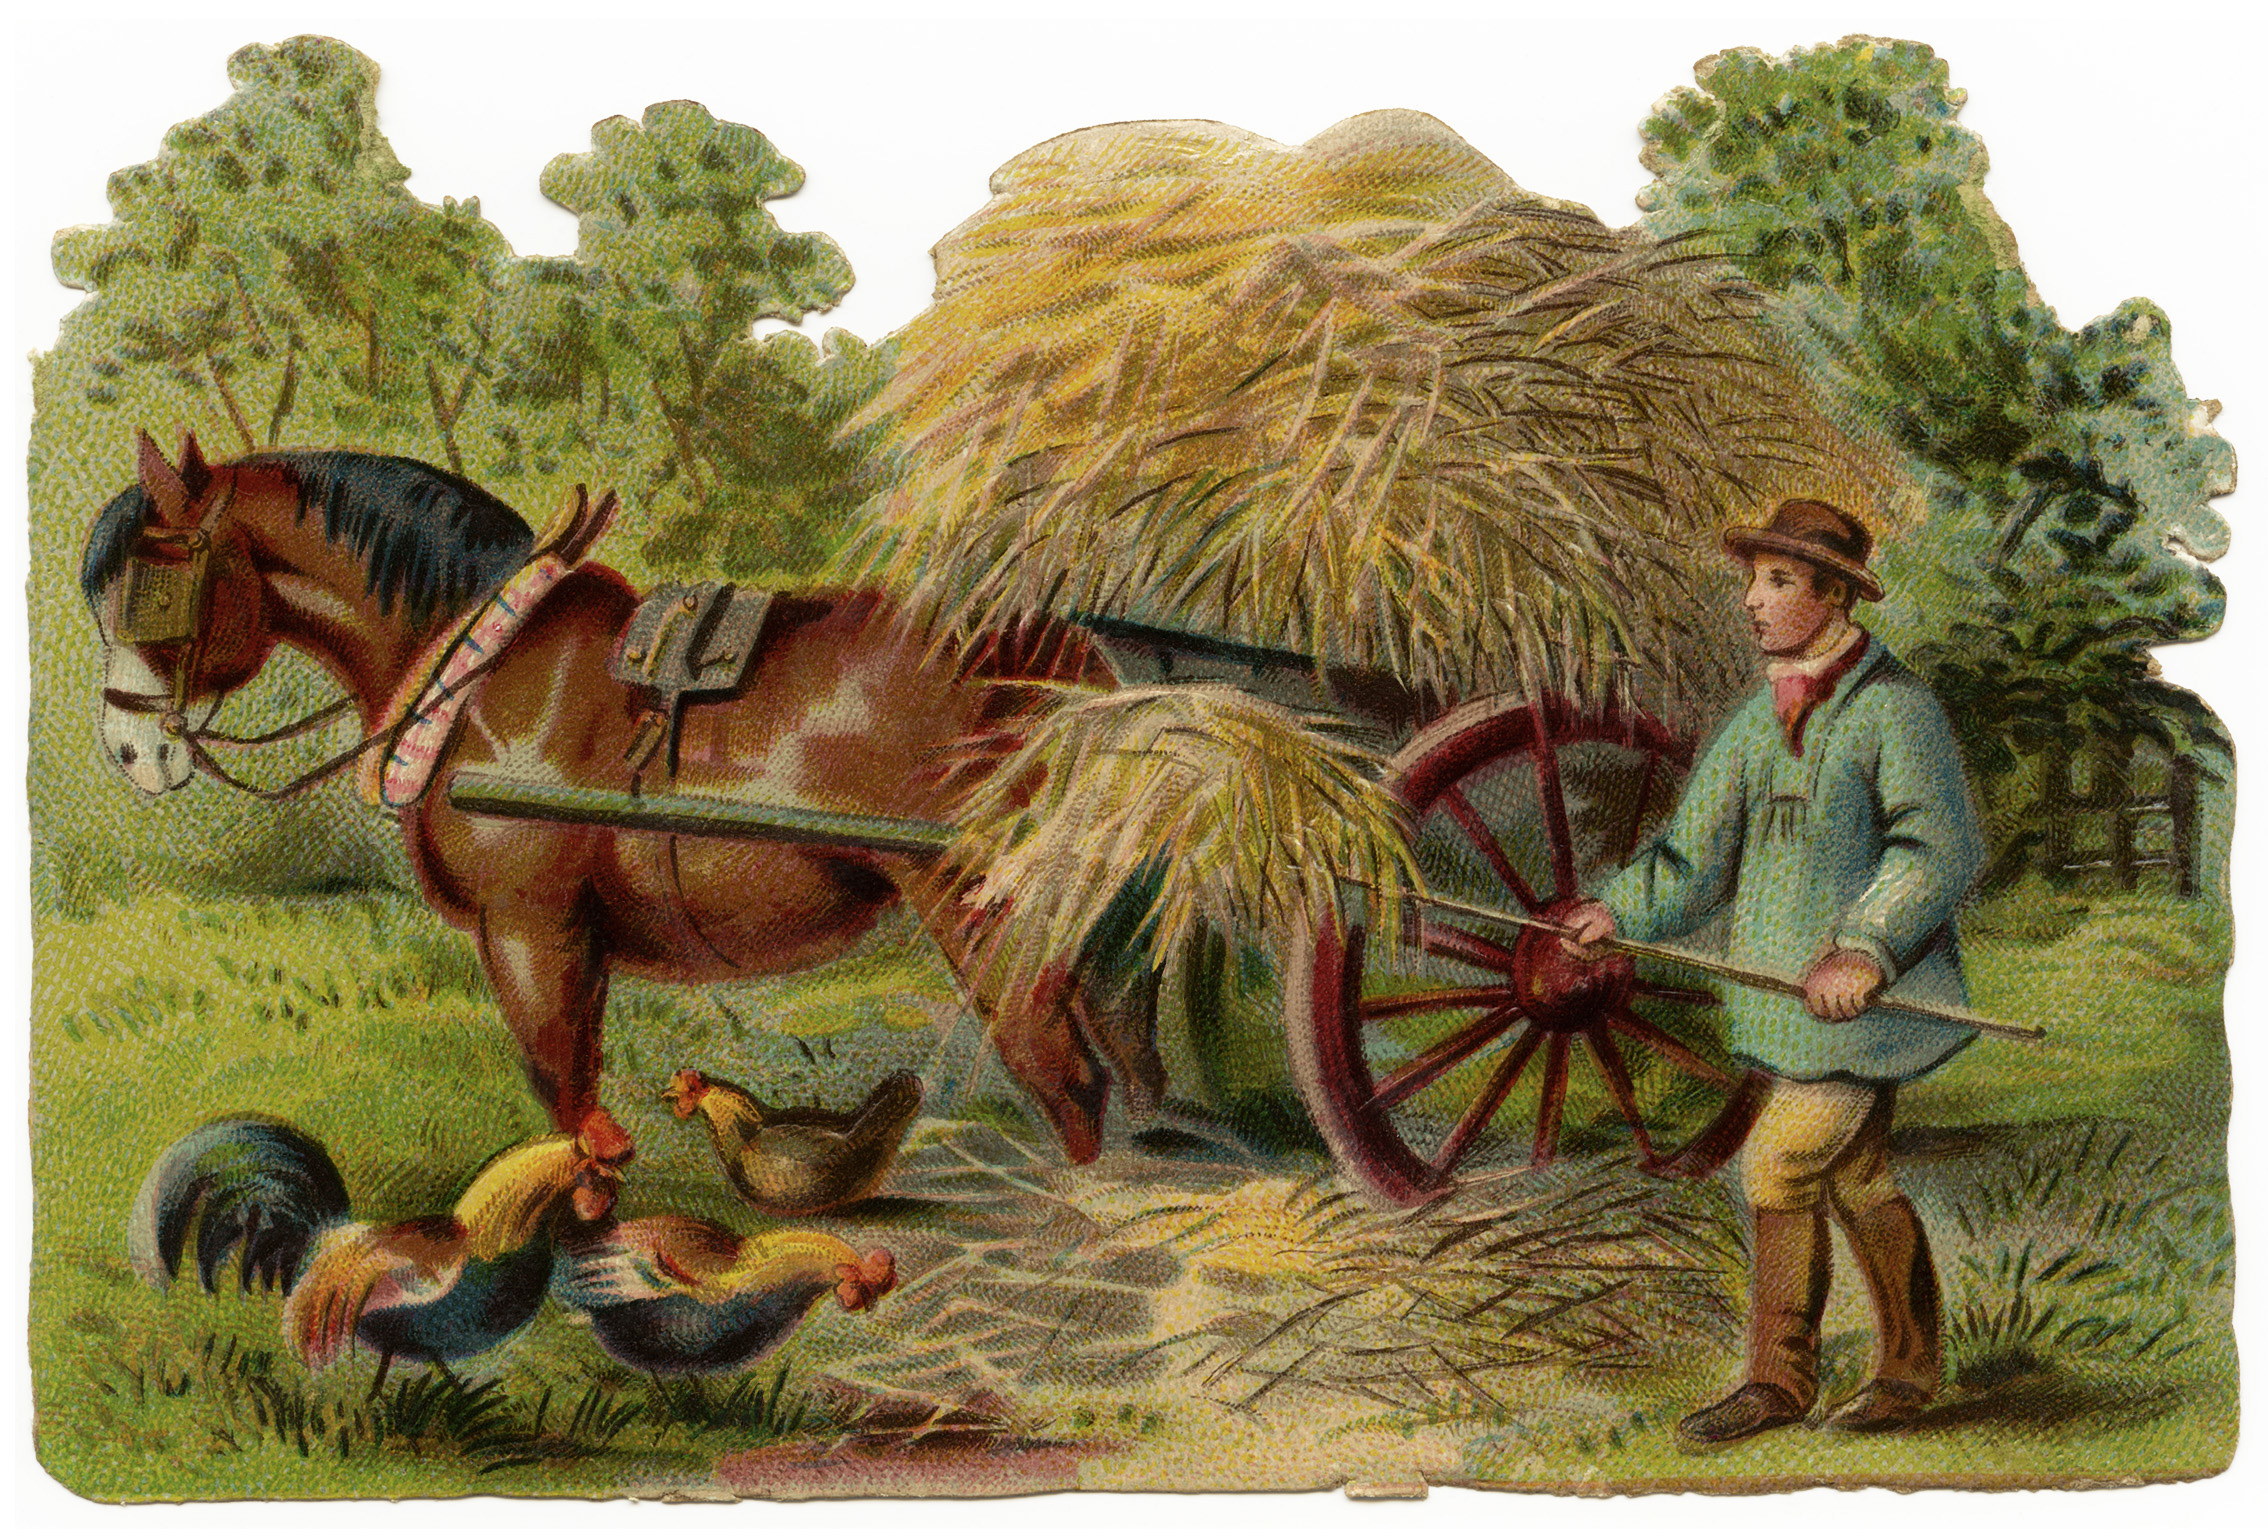 victorian clip art, vintage farm clipart, farmer stooking hay, horse and wagon image, old fashioned farm graphics